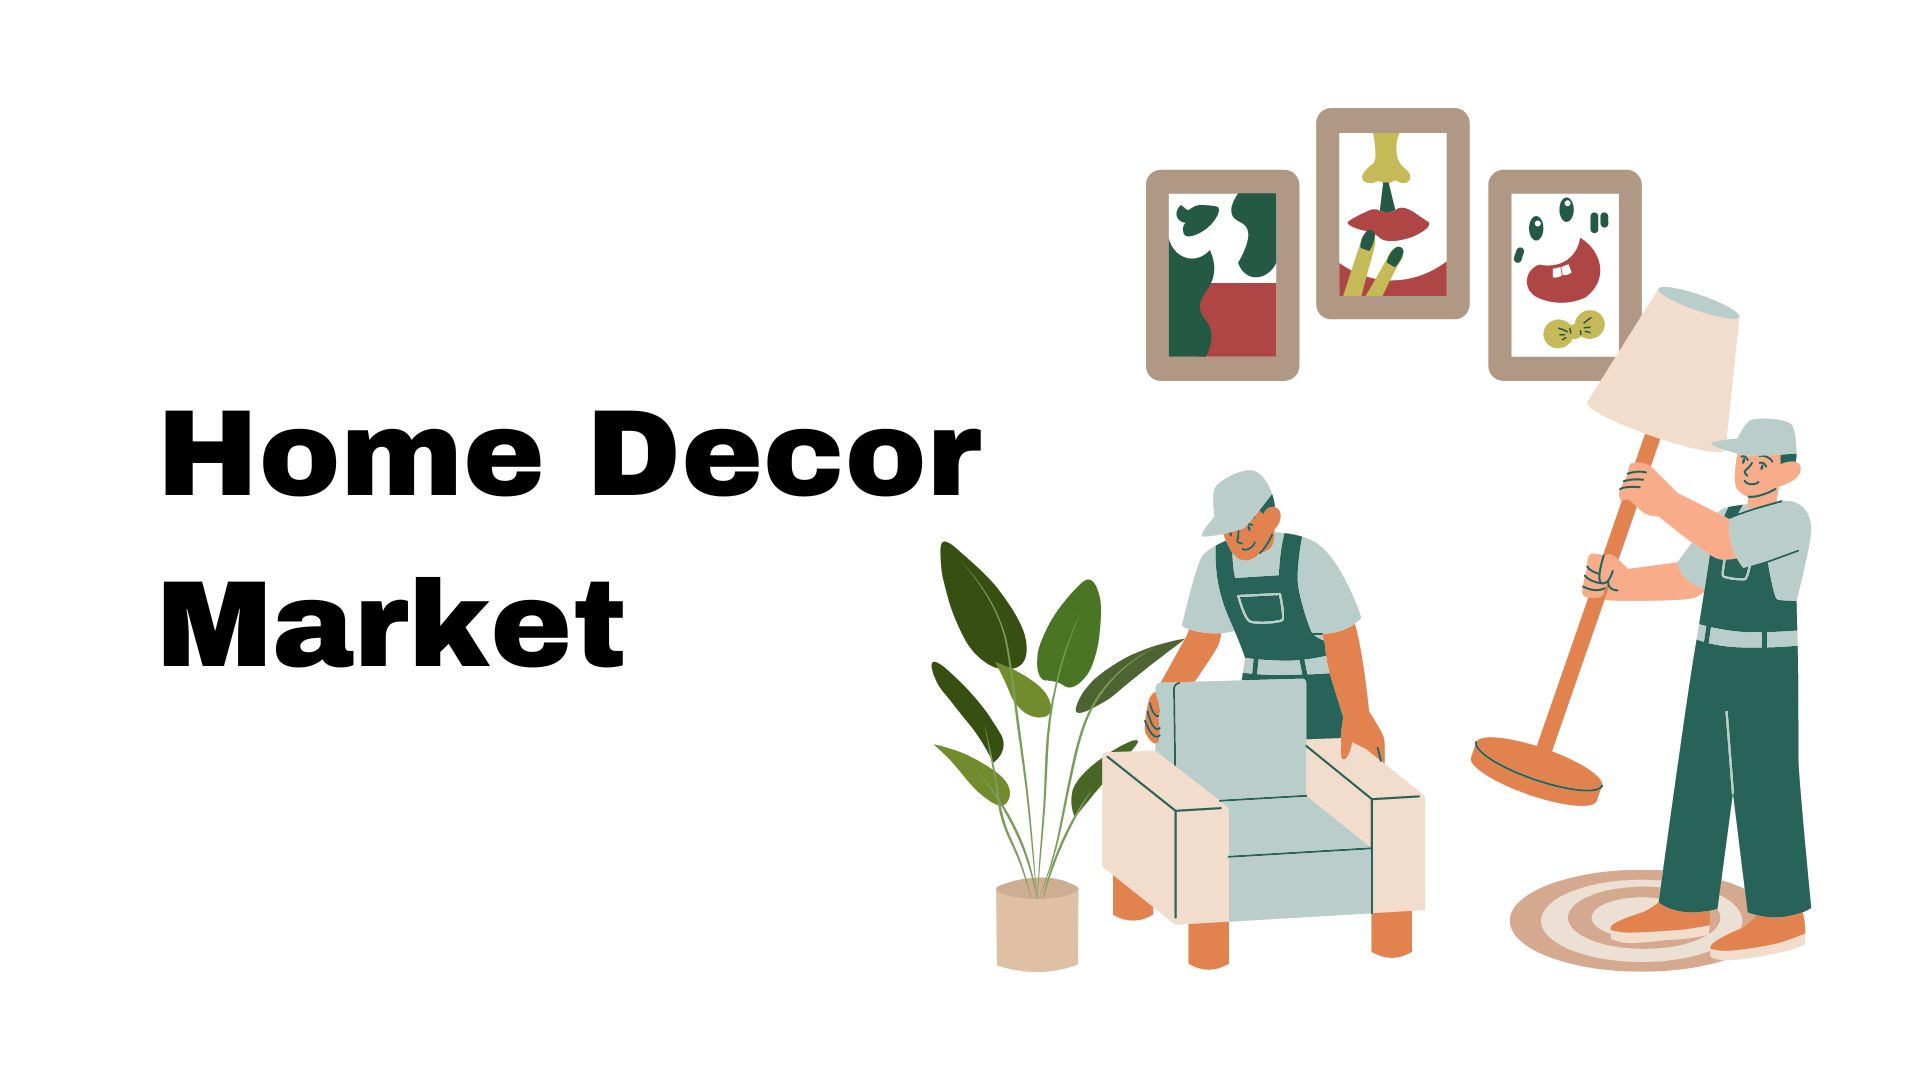 Home Decor Market To Hit USD 949 Bn, Globally, by 2032 at 3.6% CAGR | According To Market.us